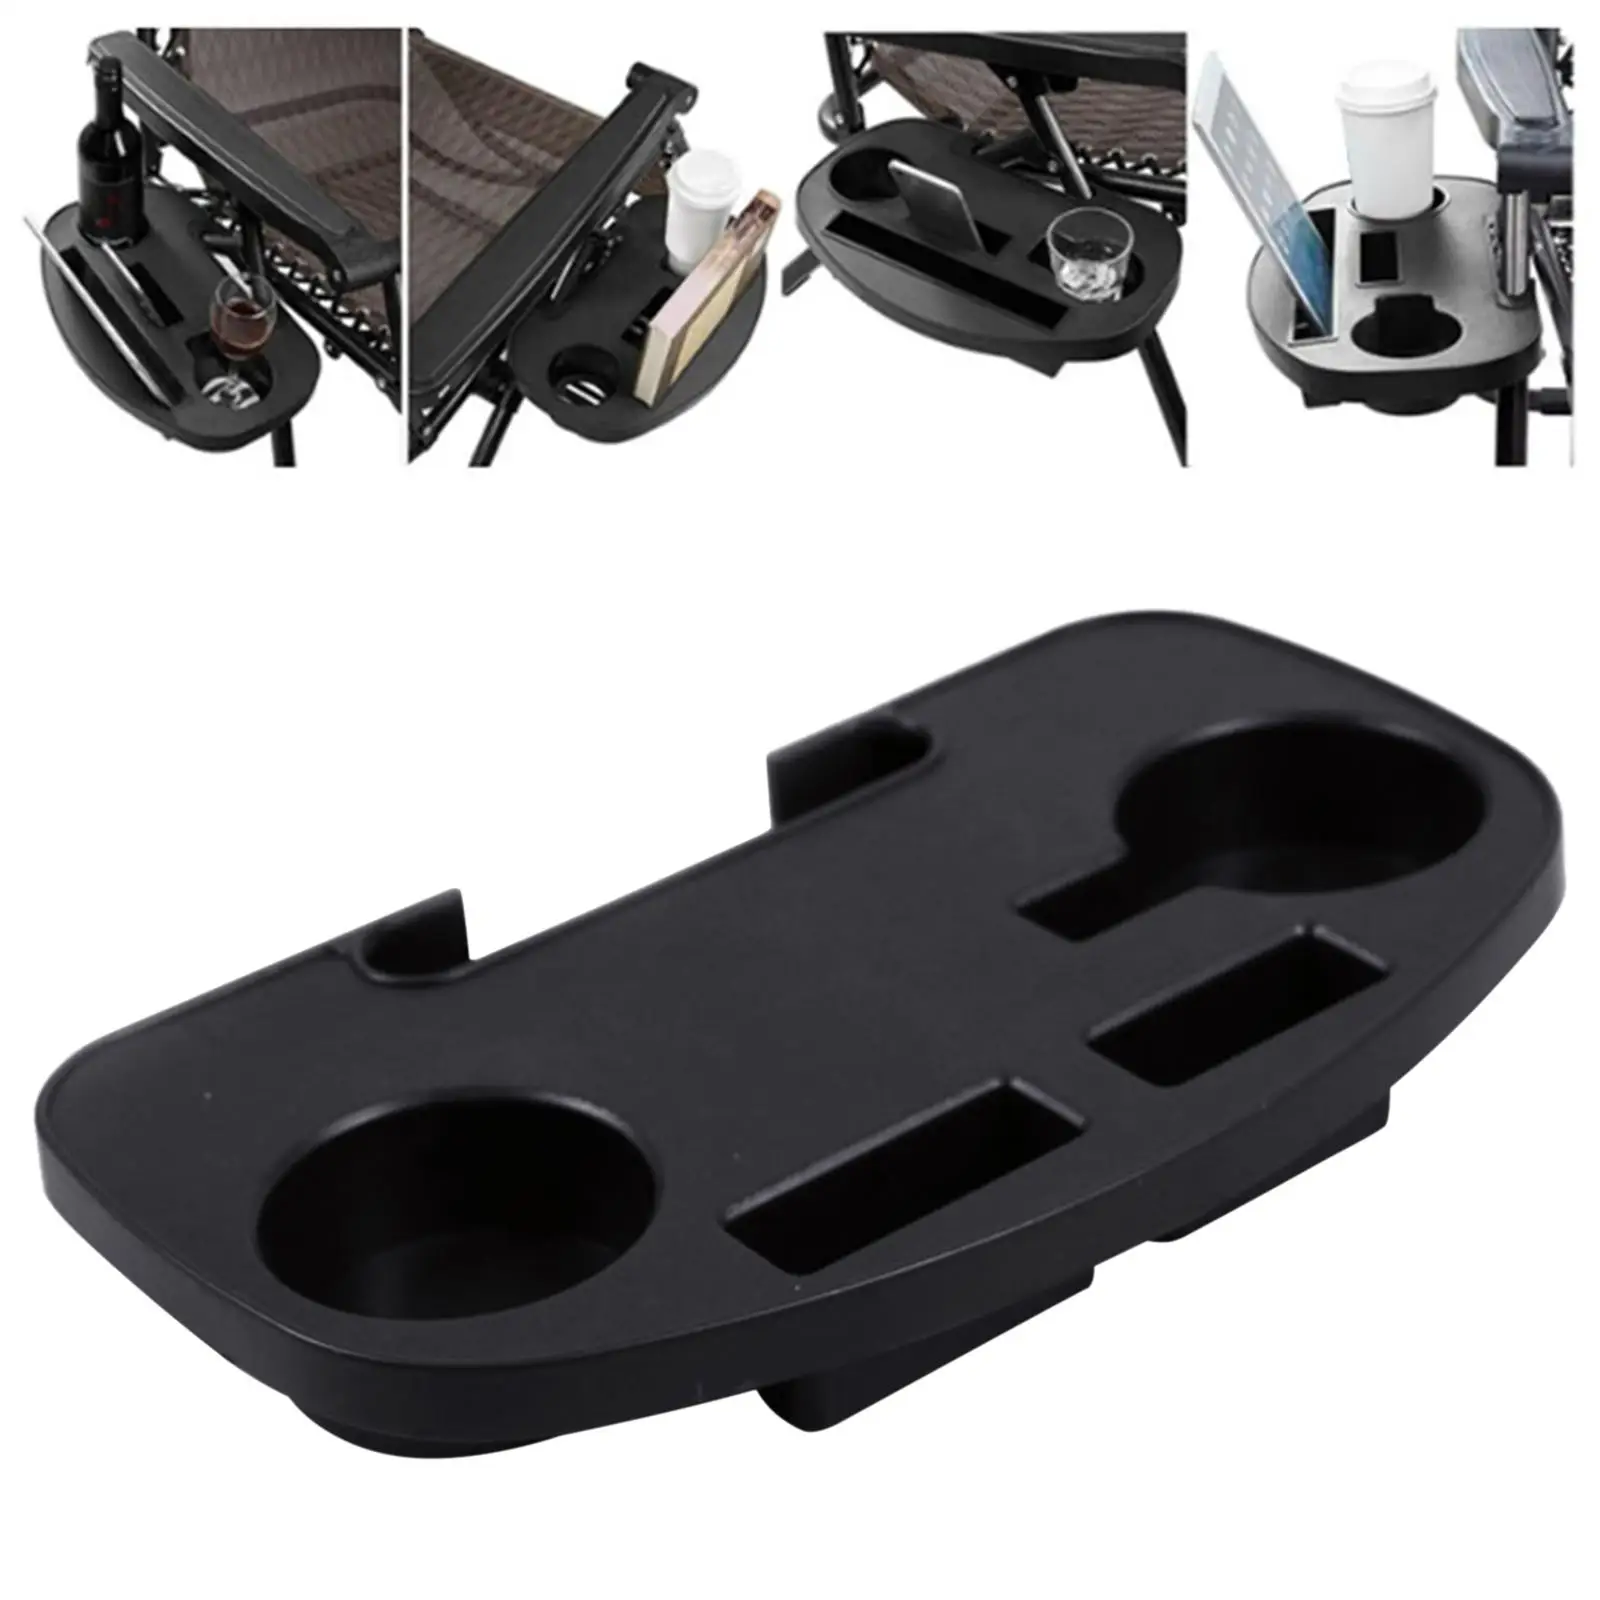 Recliner Side Table Cup Holder Snack Tray for Beach Garden Lounge Chair